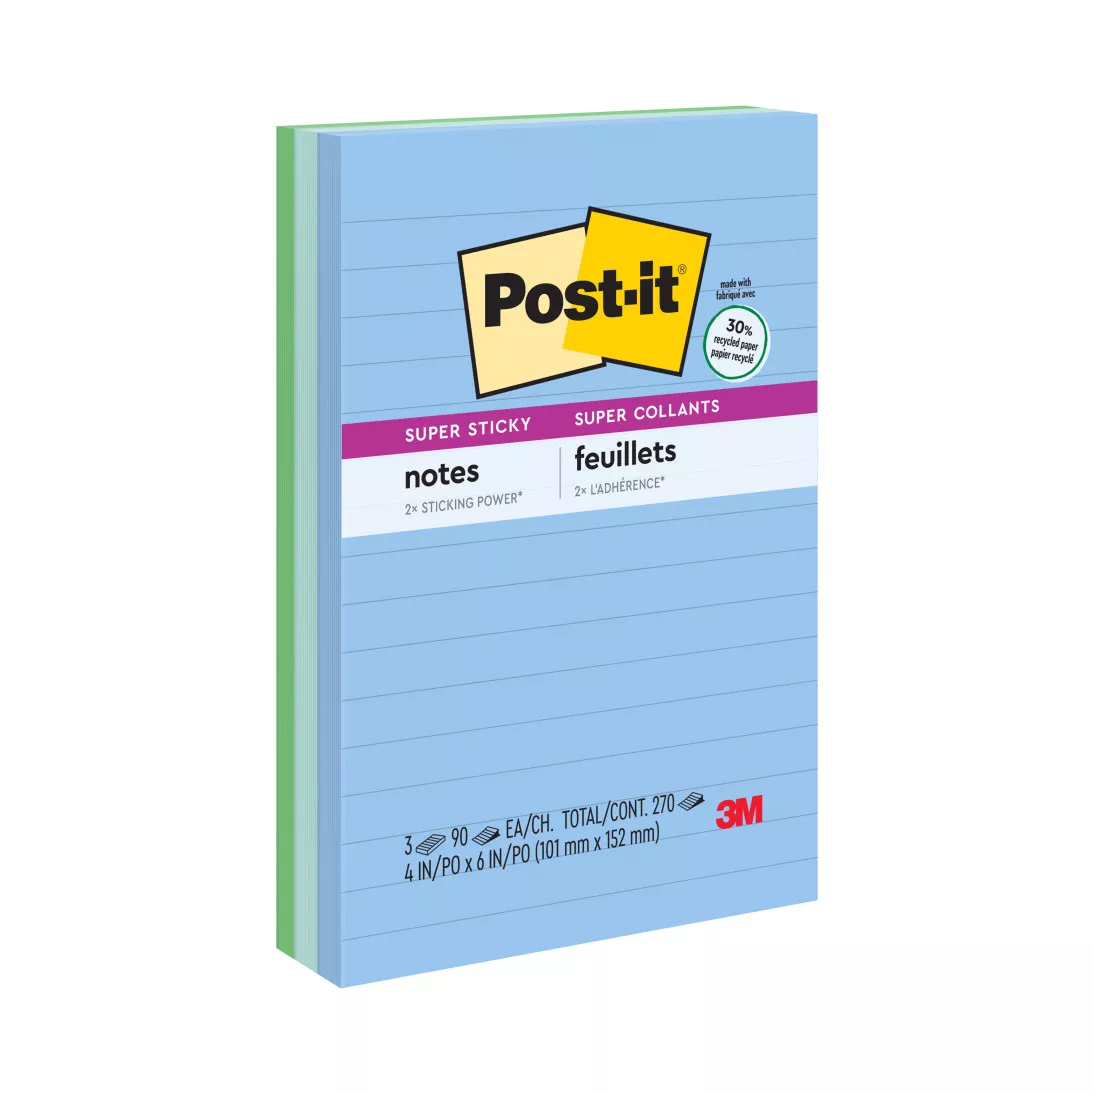 Post-it® Super Sticky Recycled Notes 660-3SST, 4 in x 6 in (101 mm x 152
mm) Bora Bora Collection, Lined, 3 Pads/Pack